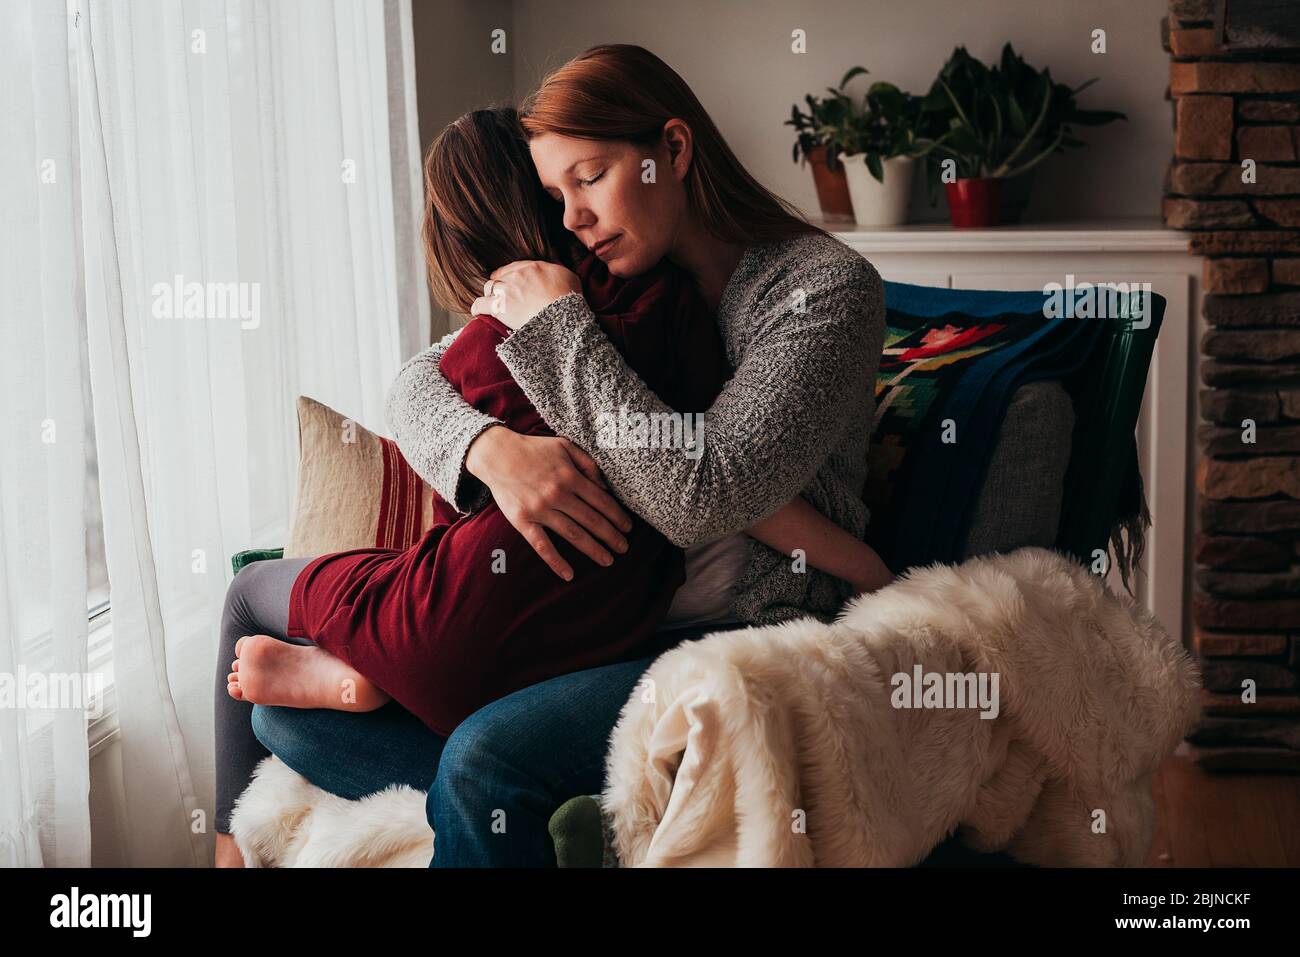 Girl sitting on her mother's lap cuddling Stock Photo